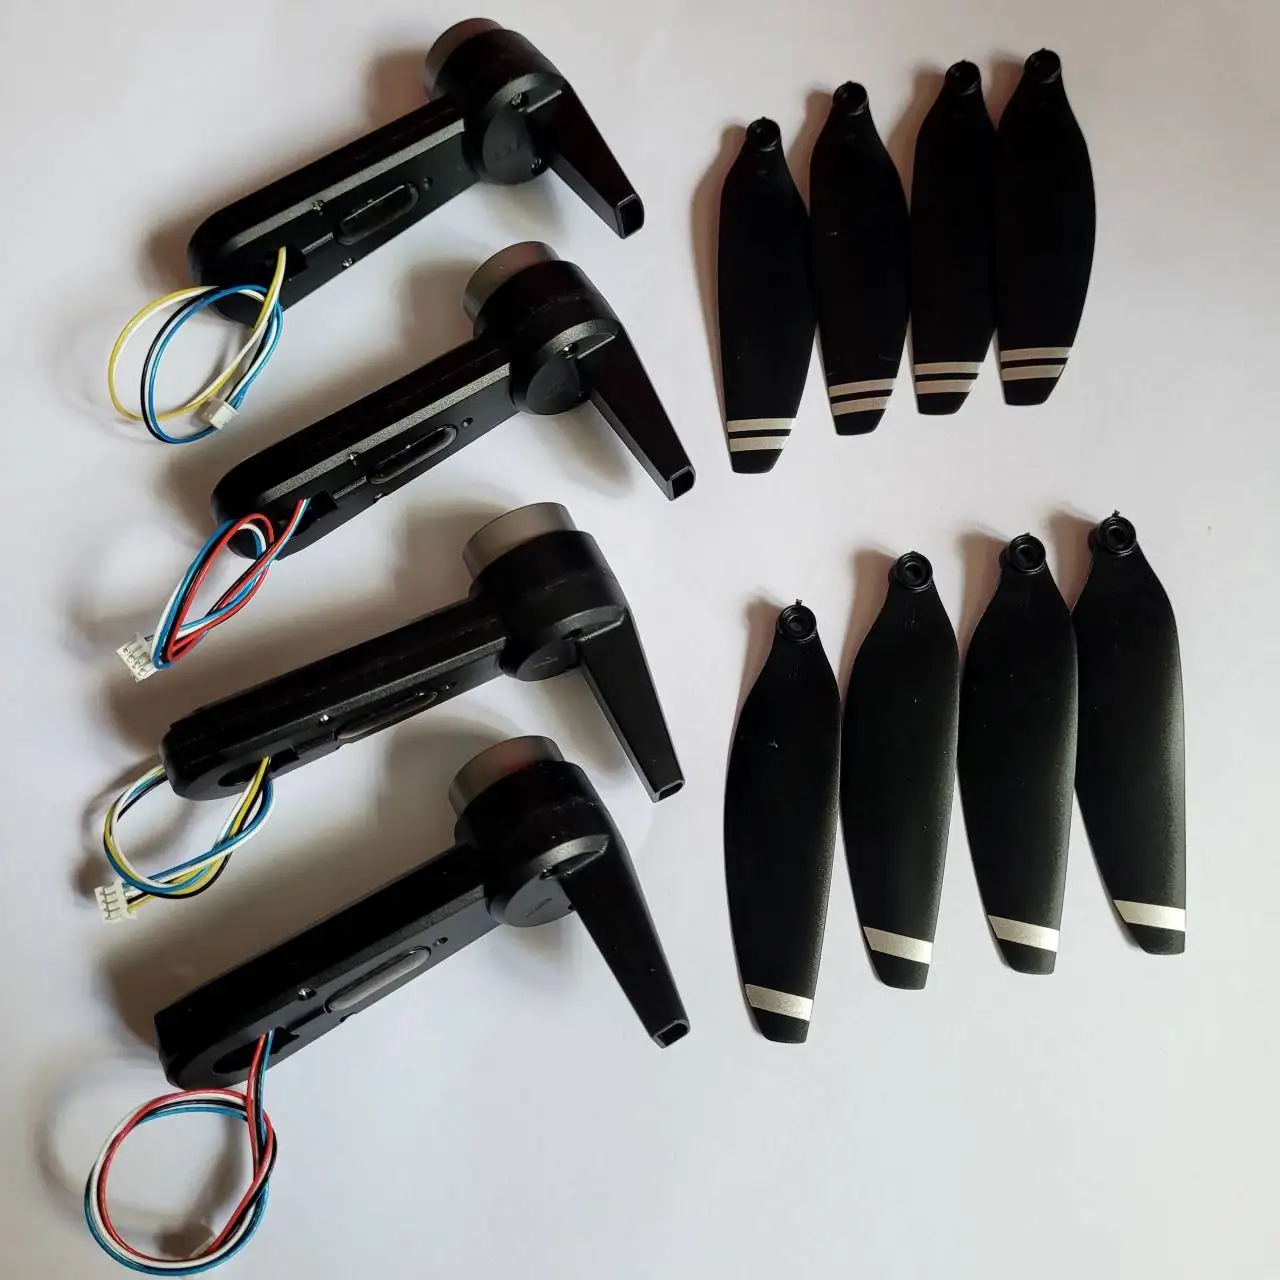 

LSRC LS38 Drone Propeller Maple Leaf Blade / Front Rear Arm A B with Brushless Motor Engine LS-38 Replacement Accessory